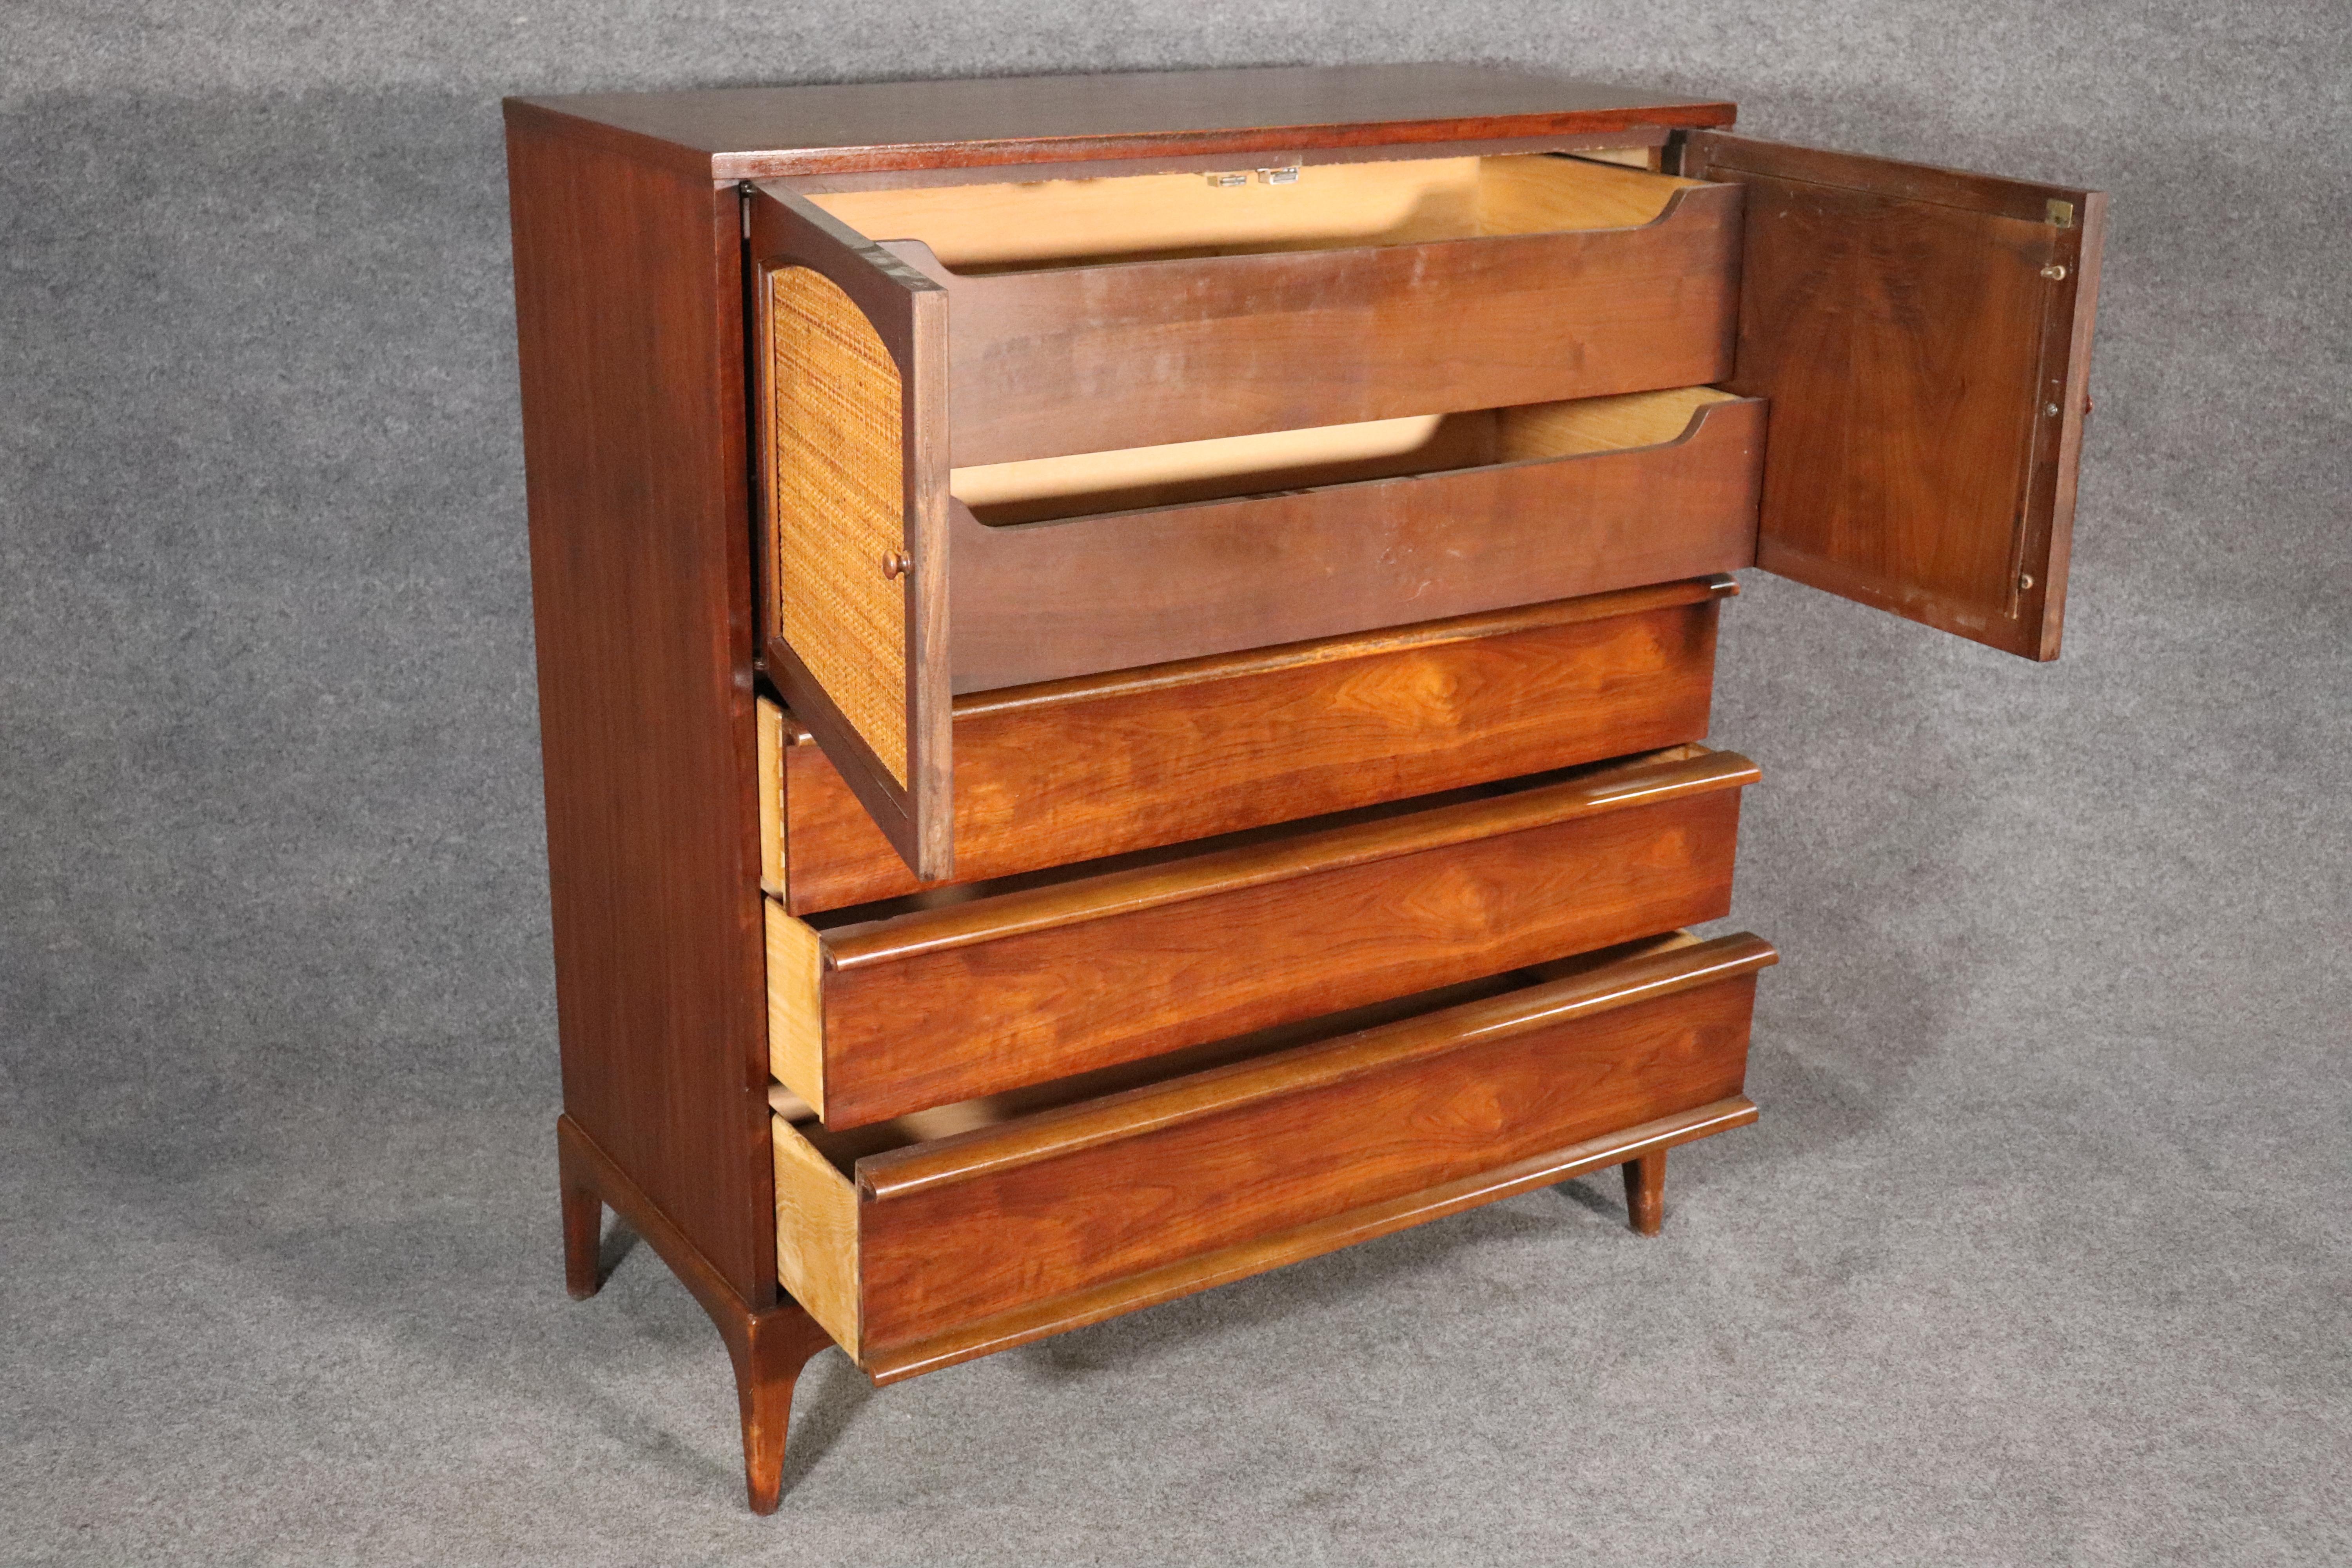 Tall mid-century modern gentleman's chest by Lane Furniture for their 